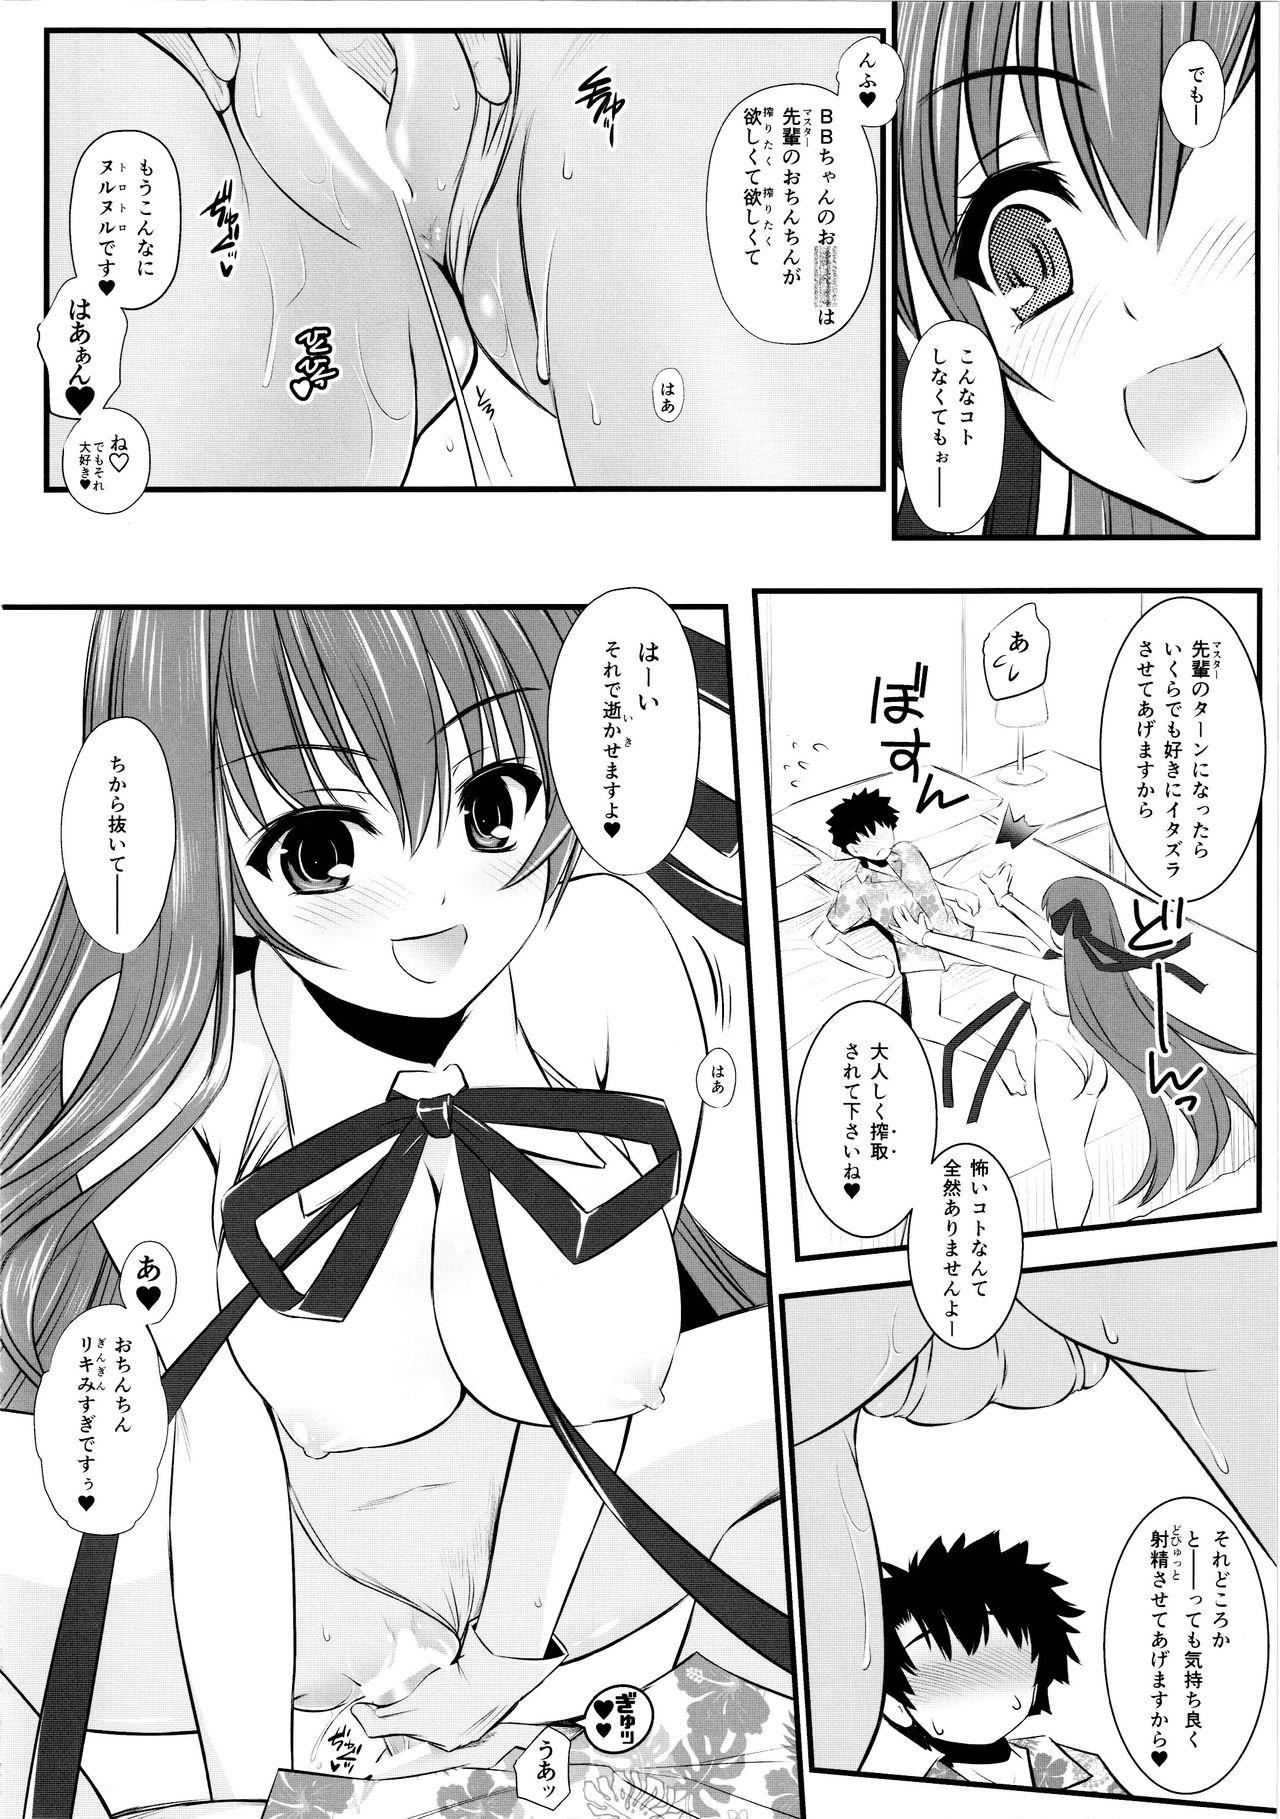 Gay Cut (C96) [Yakan Honpo (Inoue Tommy)] Queen [Kyuuin] BB-chan (Fate/Grand Order) - Fate grand order Gay Natural - Page 8